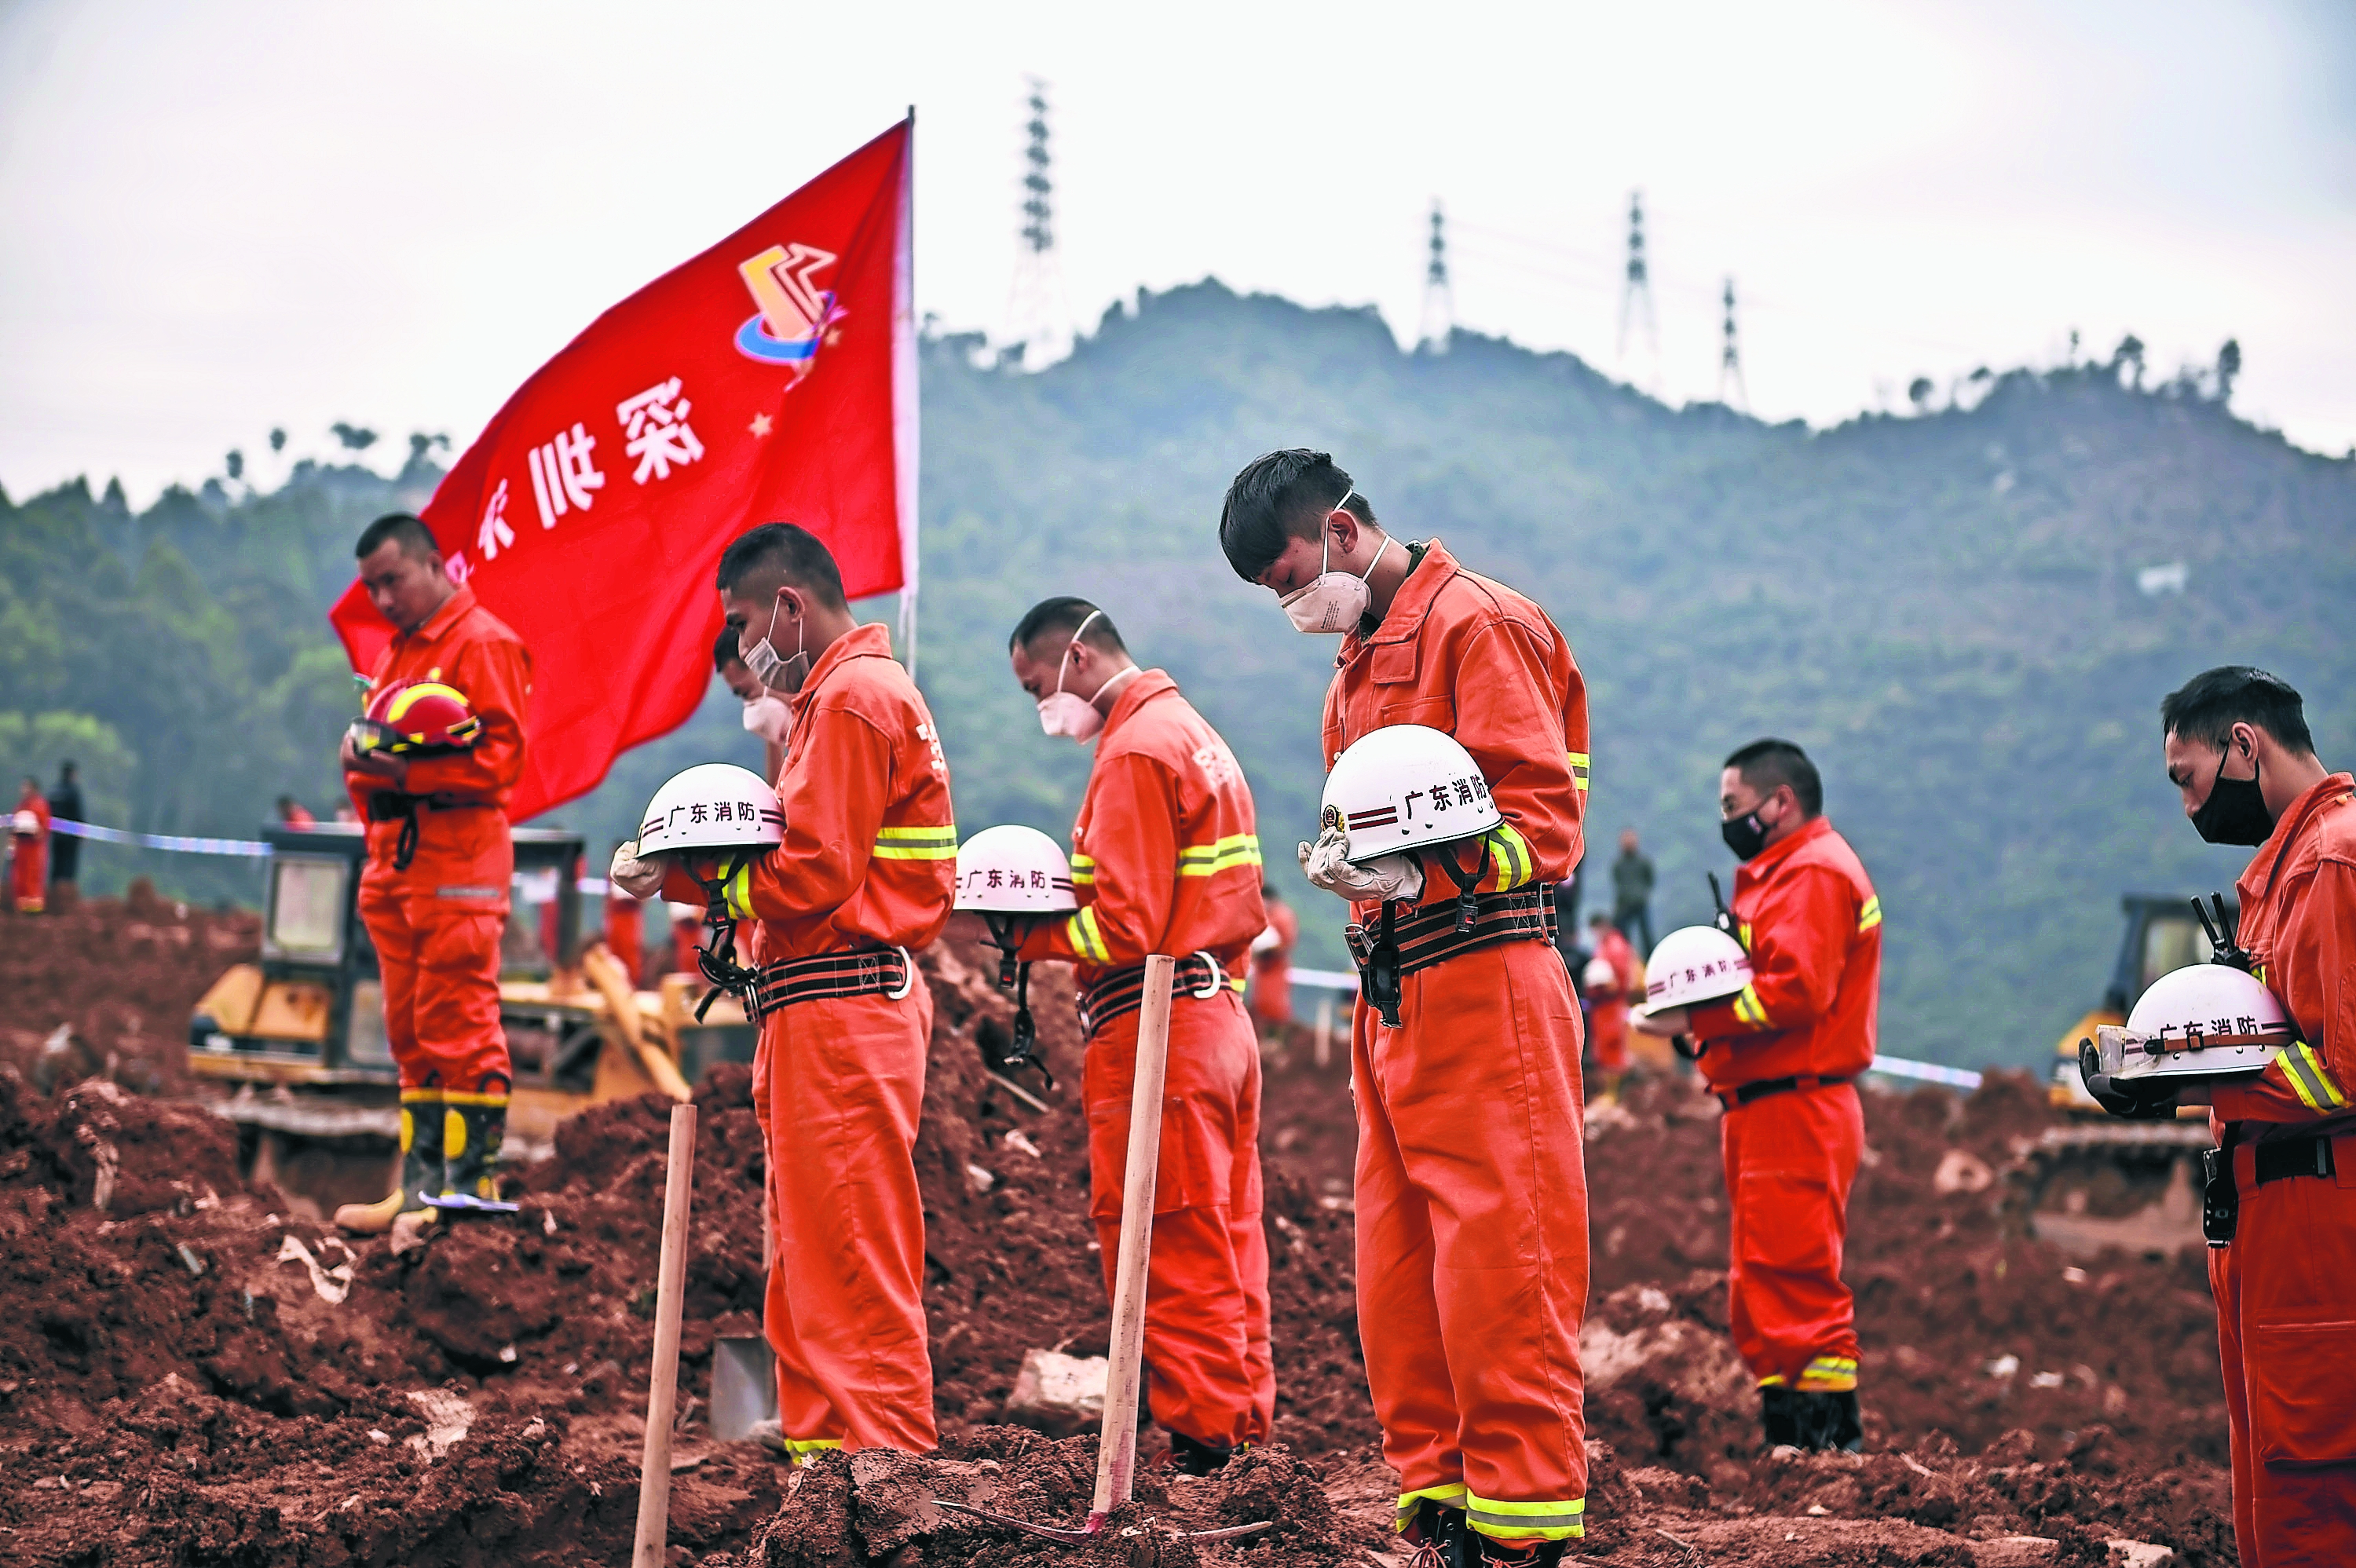 Rescuers pause to mourn the victims at the landslide disaster site in Shenzhen yesterday. Photo: Xinhua